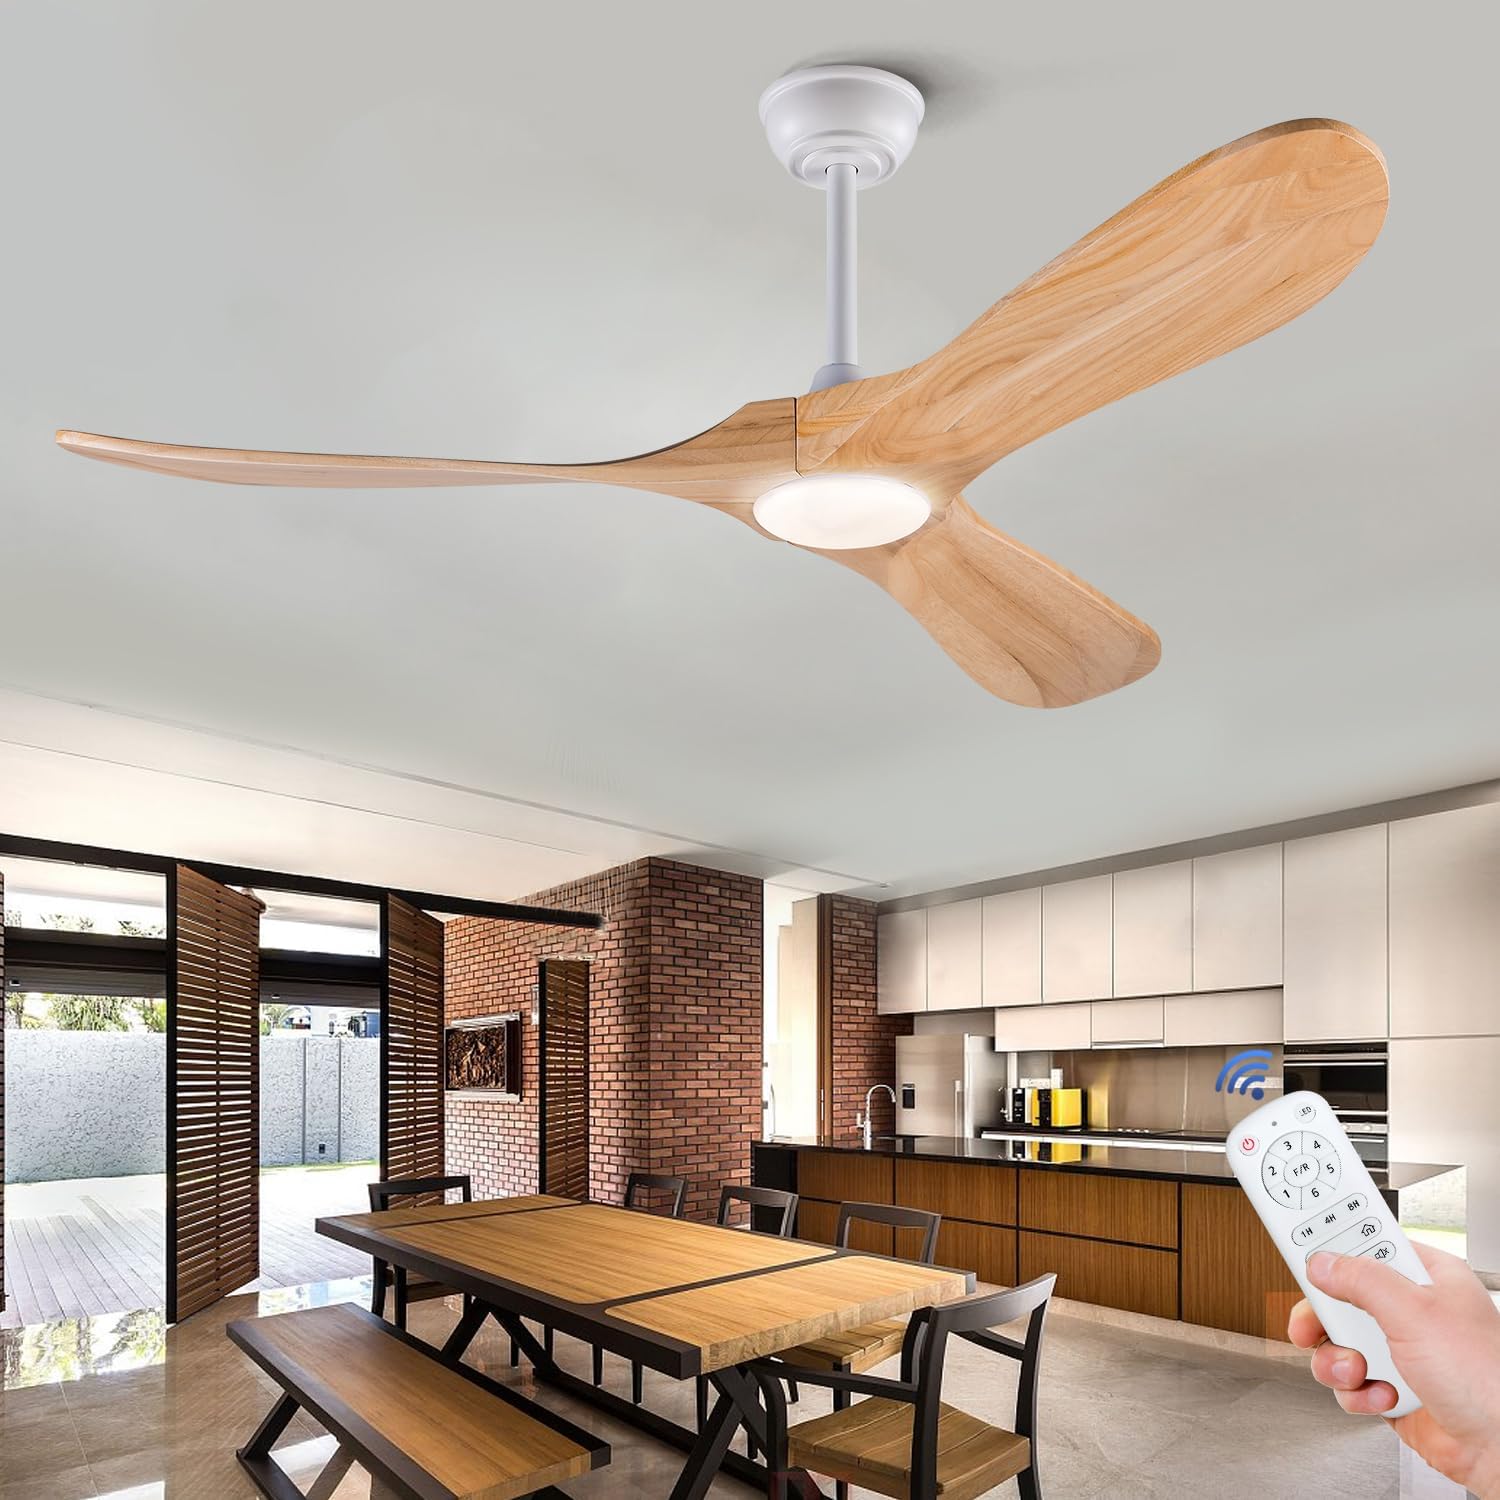 BOJUE 52 Ceiling Fan with Lights Indoor Outdoor Ceiling Fan 3 Wooden Blades Remote Control with Light Modern Ceiling Fan for Porch Living Room Bedroom